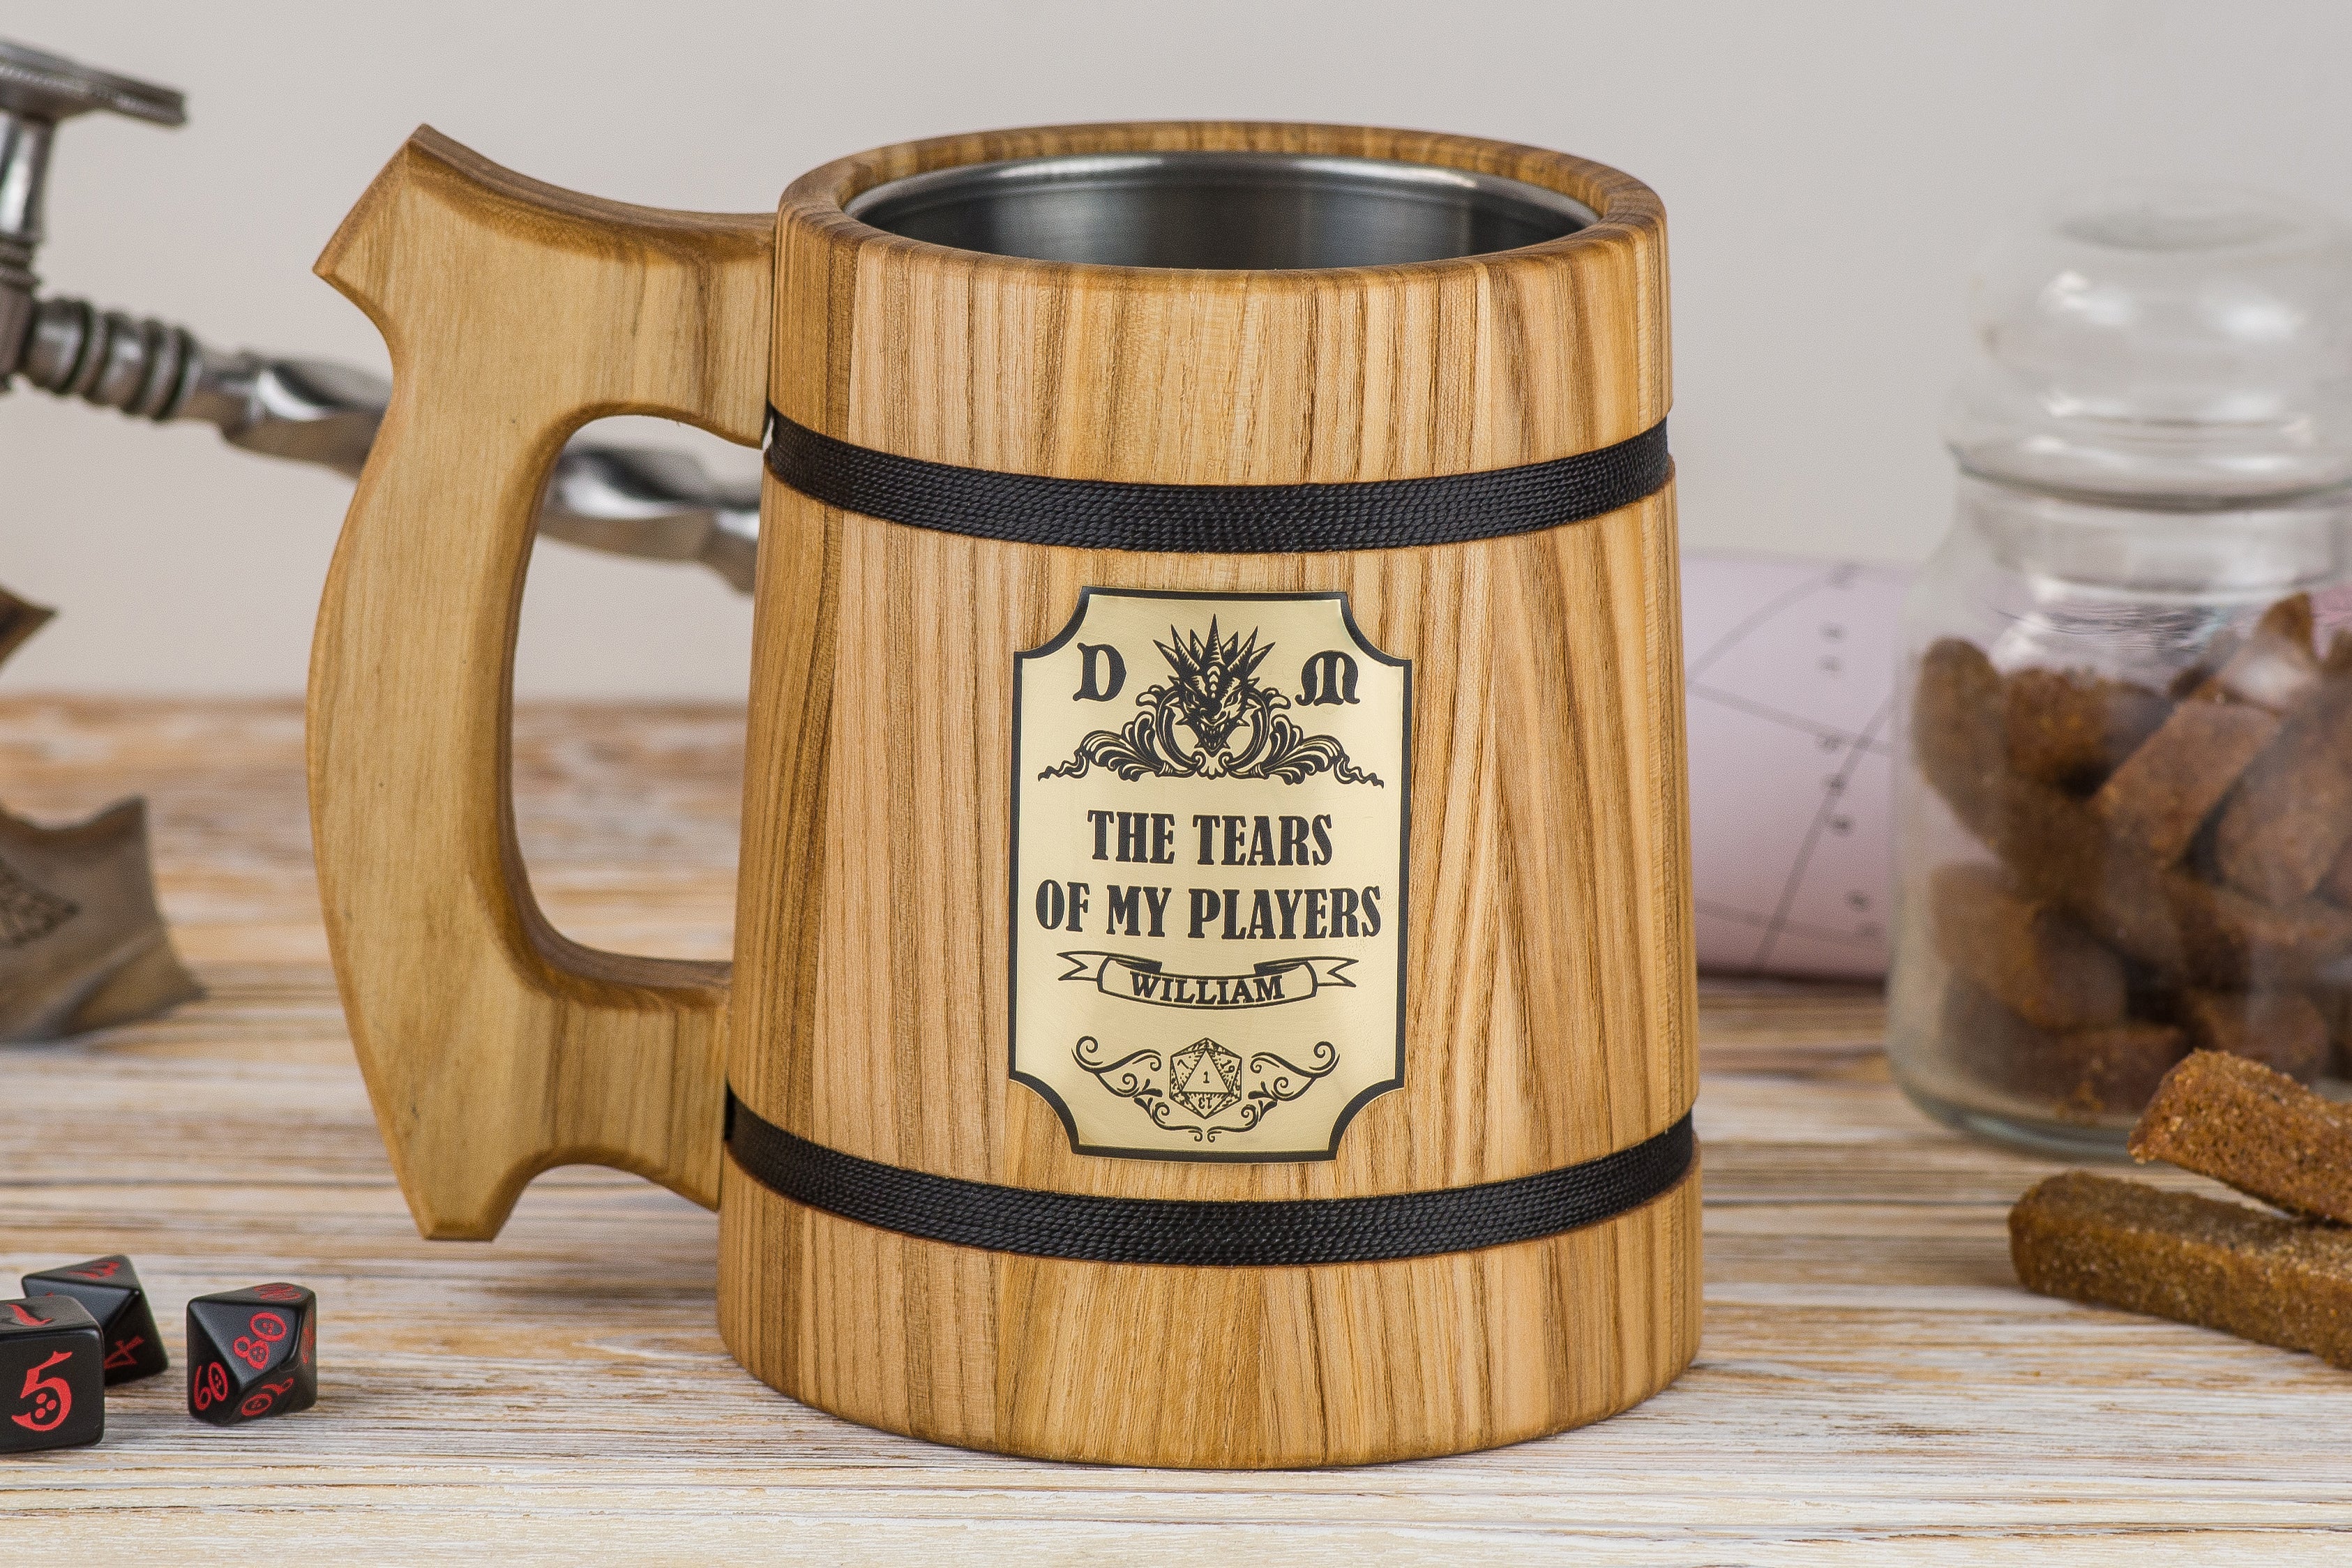 Dungeon Master mug "The tears of my players", DND Mugs - GravisCup